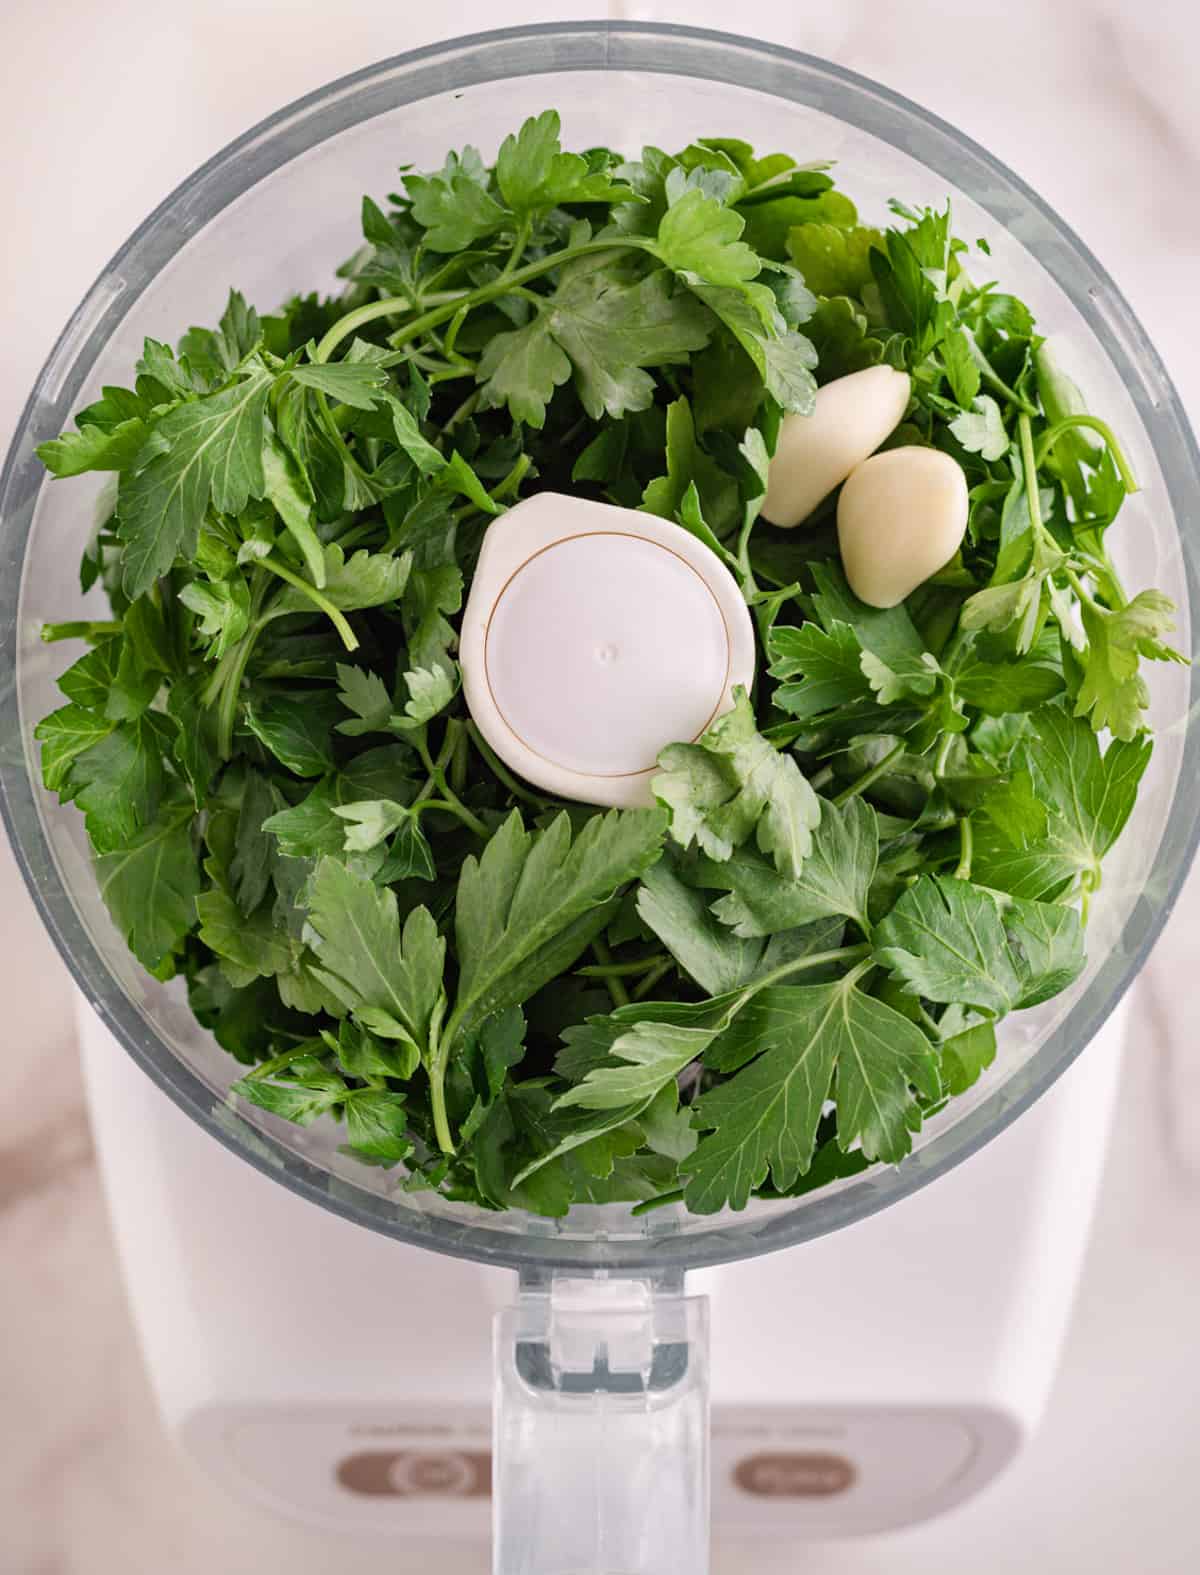 Italian parsley and garlic cloves in the bowl of a food processor.